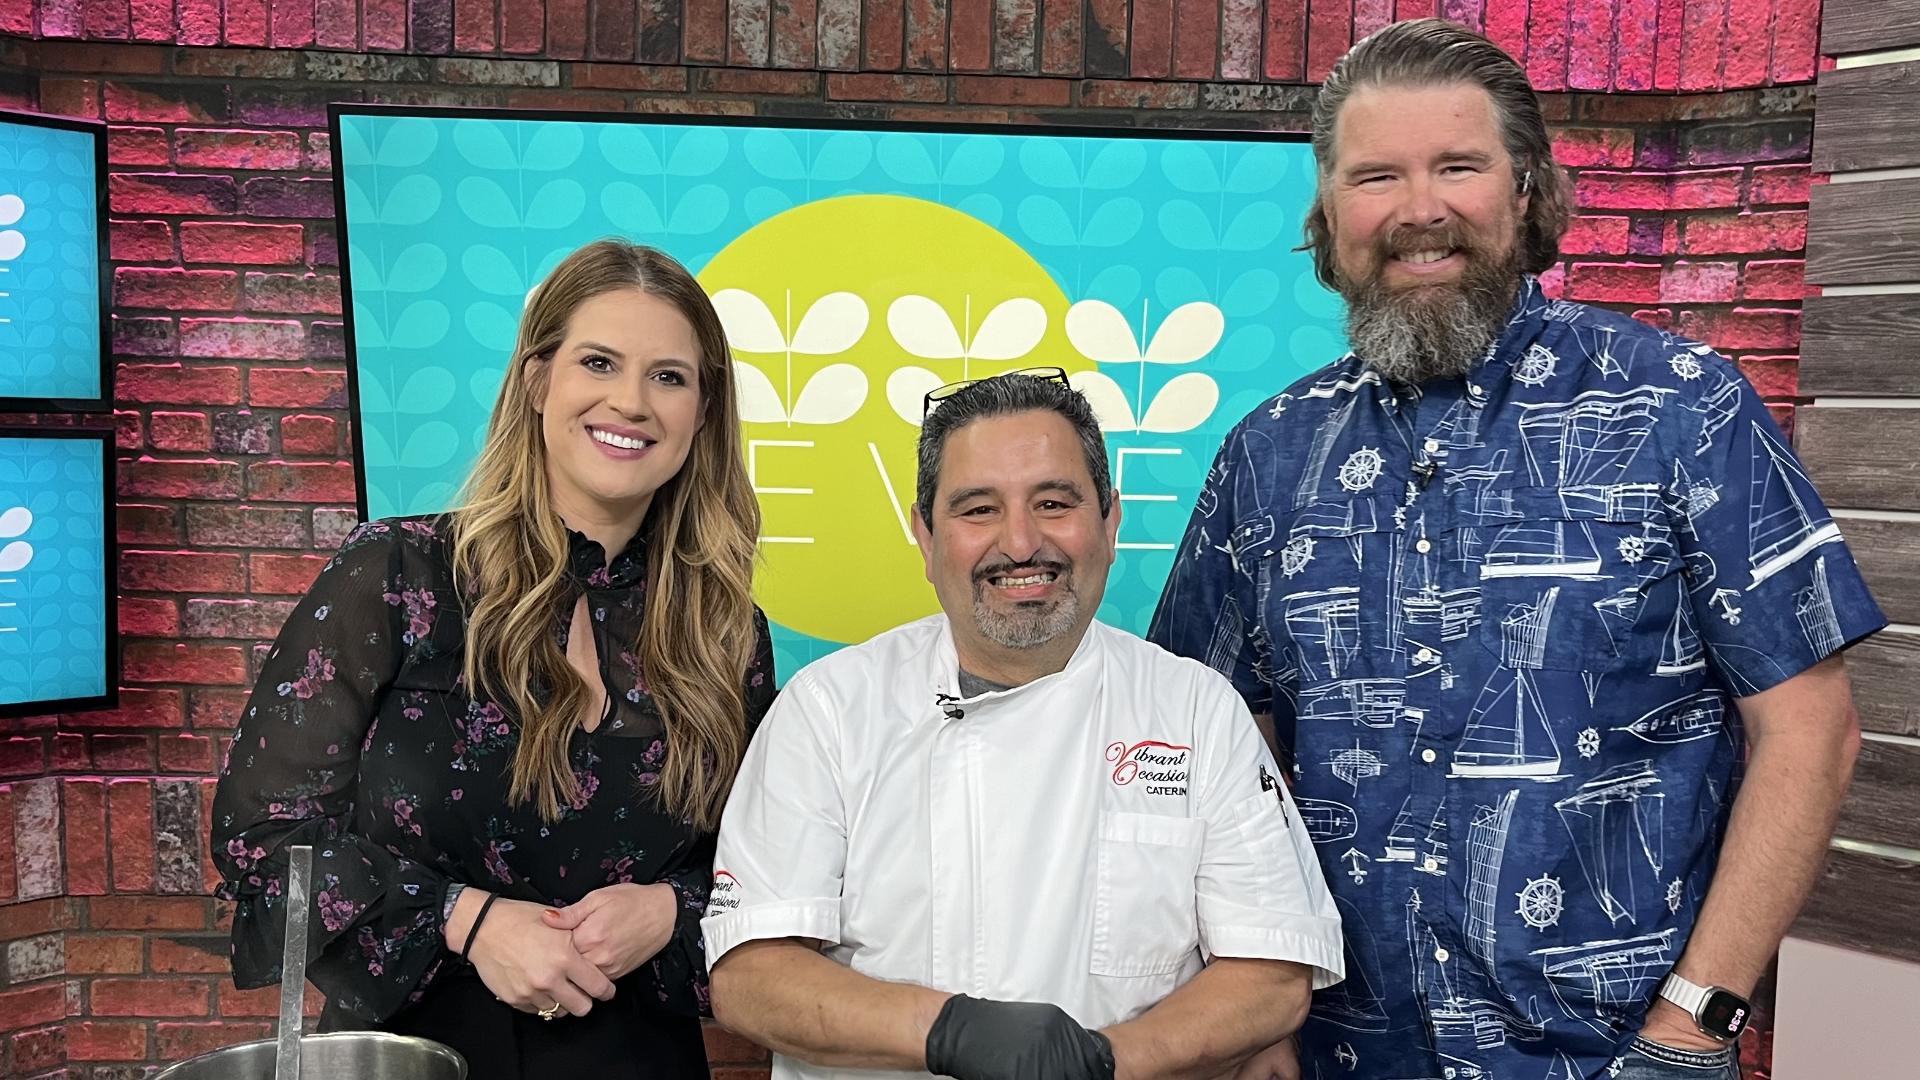 Chef Krikorian takes freshly made cheese and incorporates them in 2 different dishes. He also talks about an upcoming event to benefit cystic fibrosis.